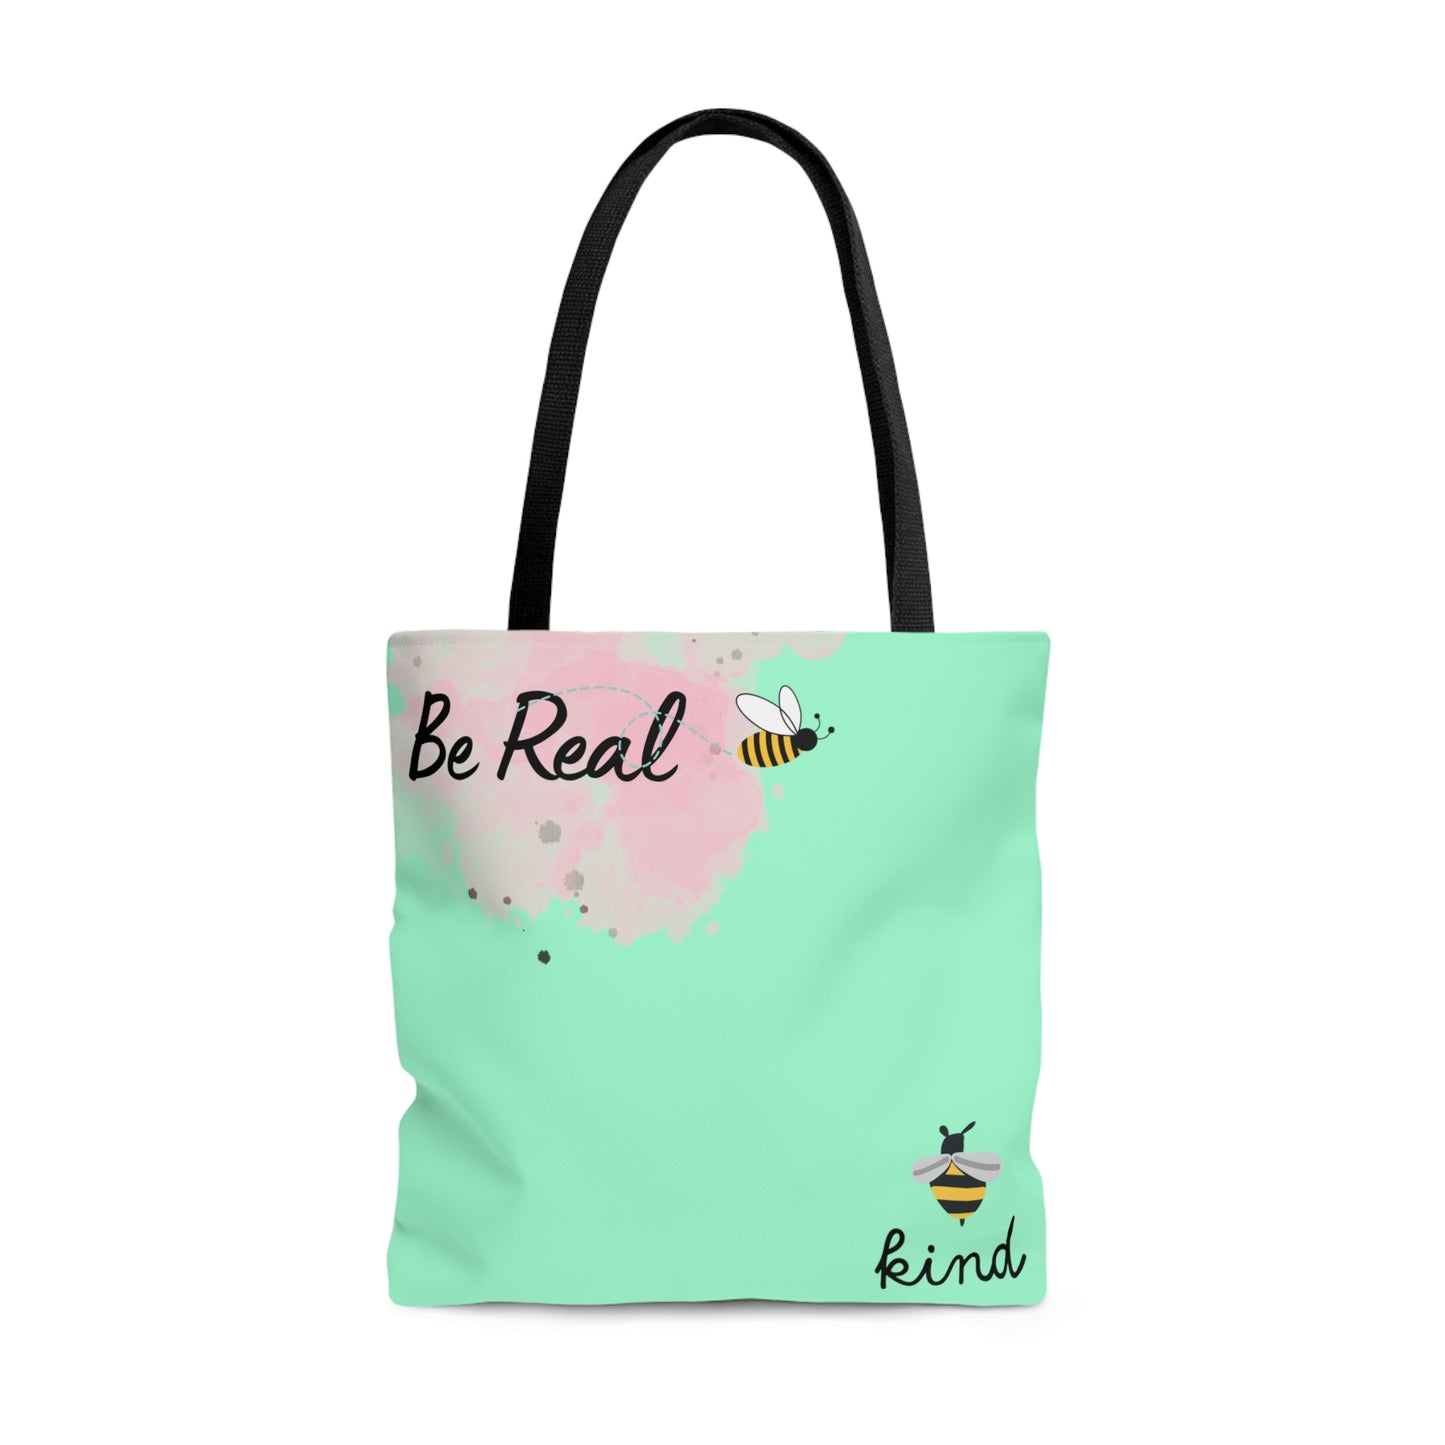 Be Real B Tote Bag | BKLA | shoes & accessories | backpack, hat, phone cover, tote bags, clutch bags